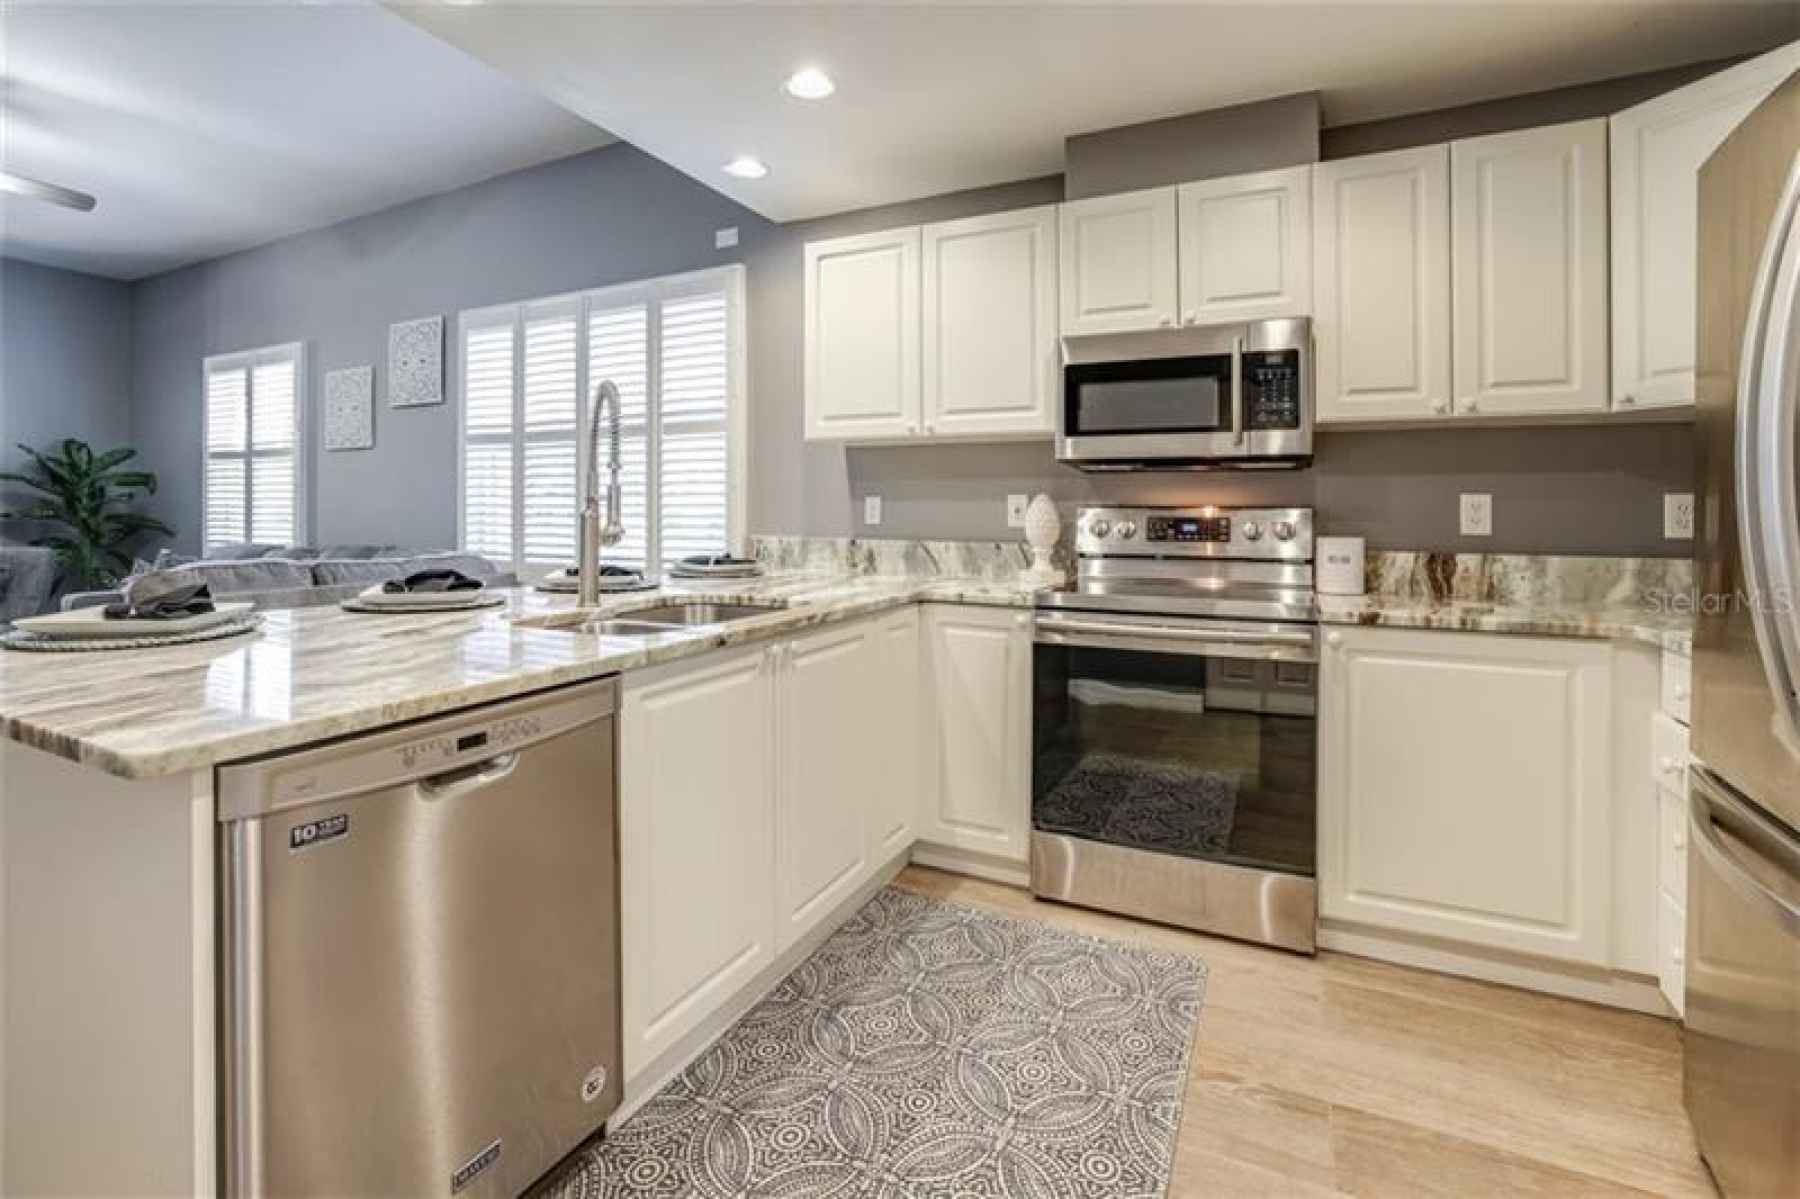 Kitchen- Stainless steal appliances and new countertops